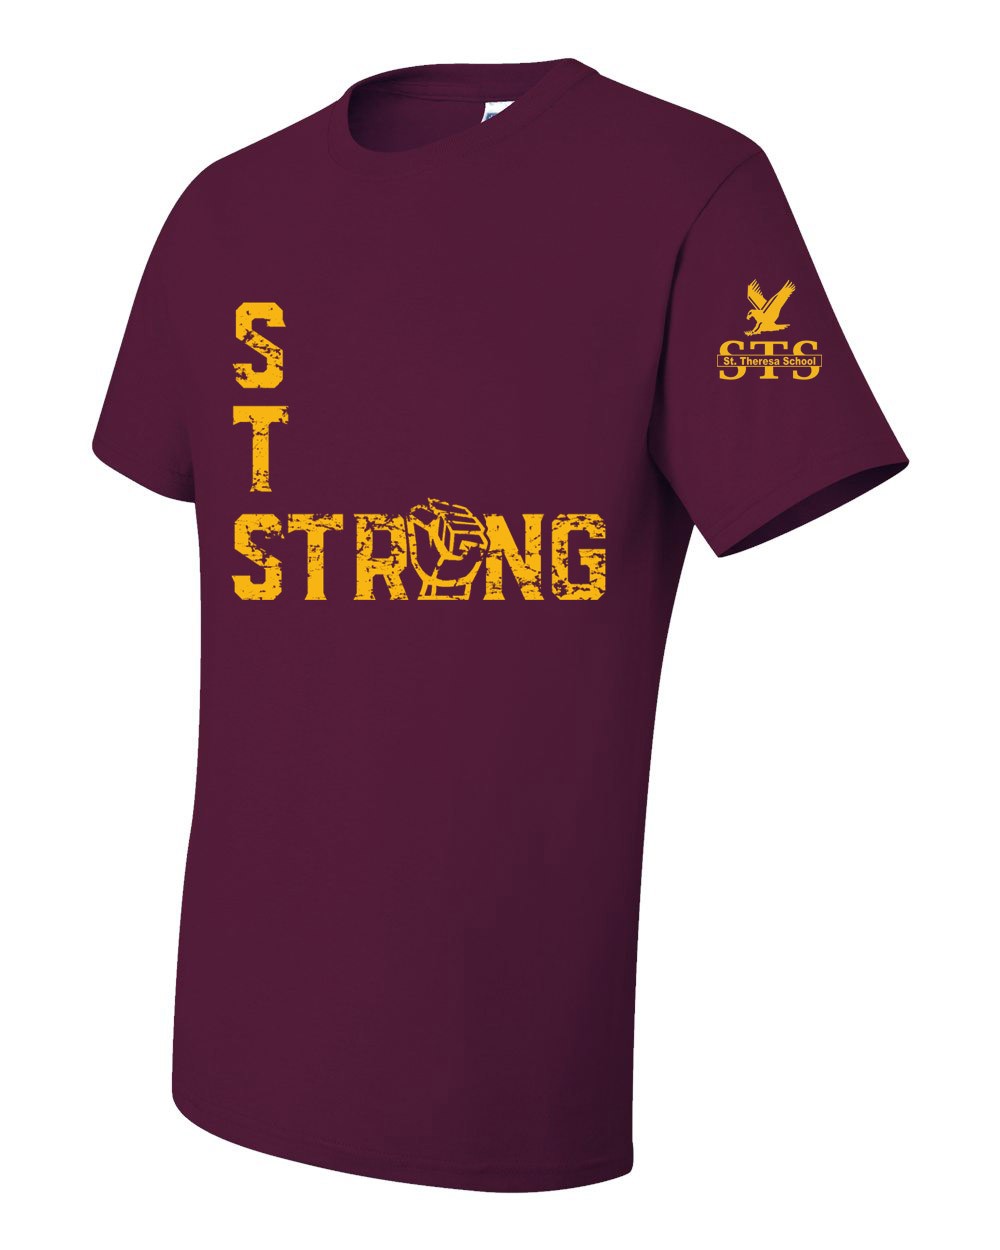 STS Staff Fist S/S Spirit T-Shirt w/ Gold Logo - Please Allow 2-3 Weeks for Delivery